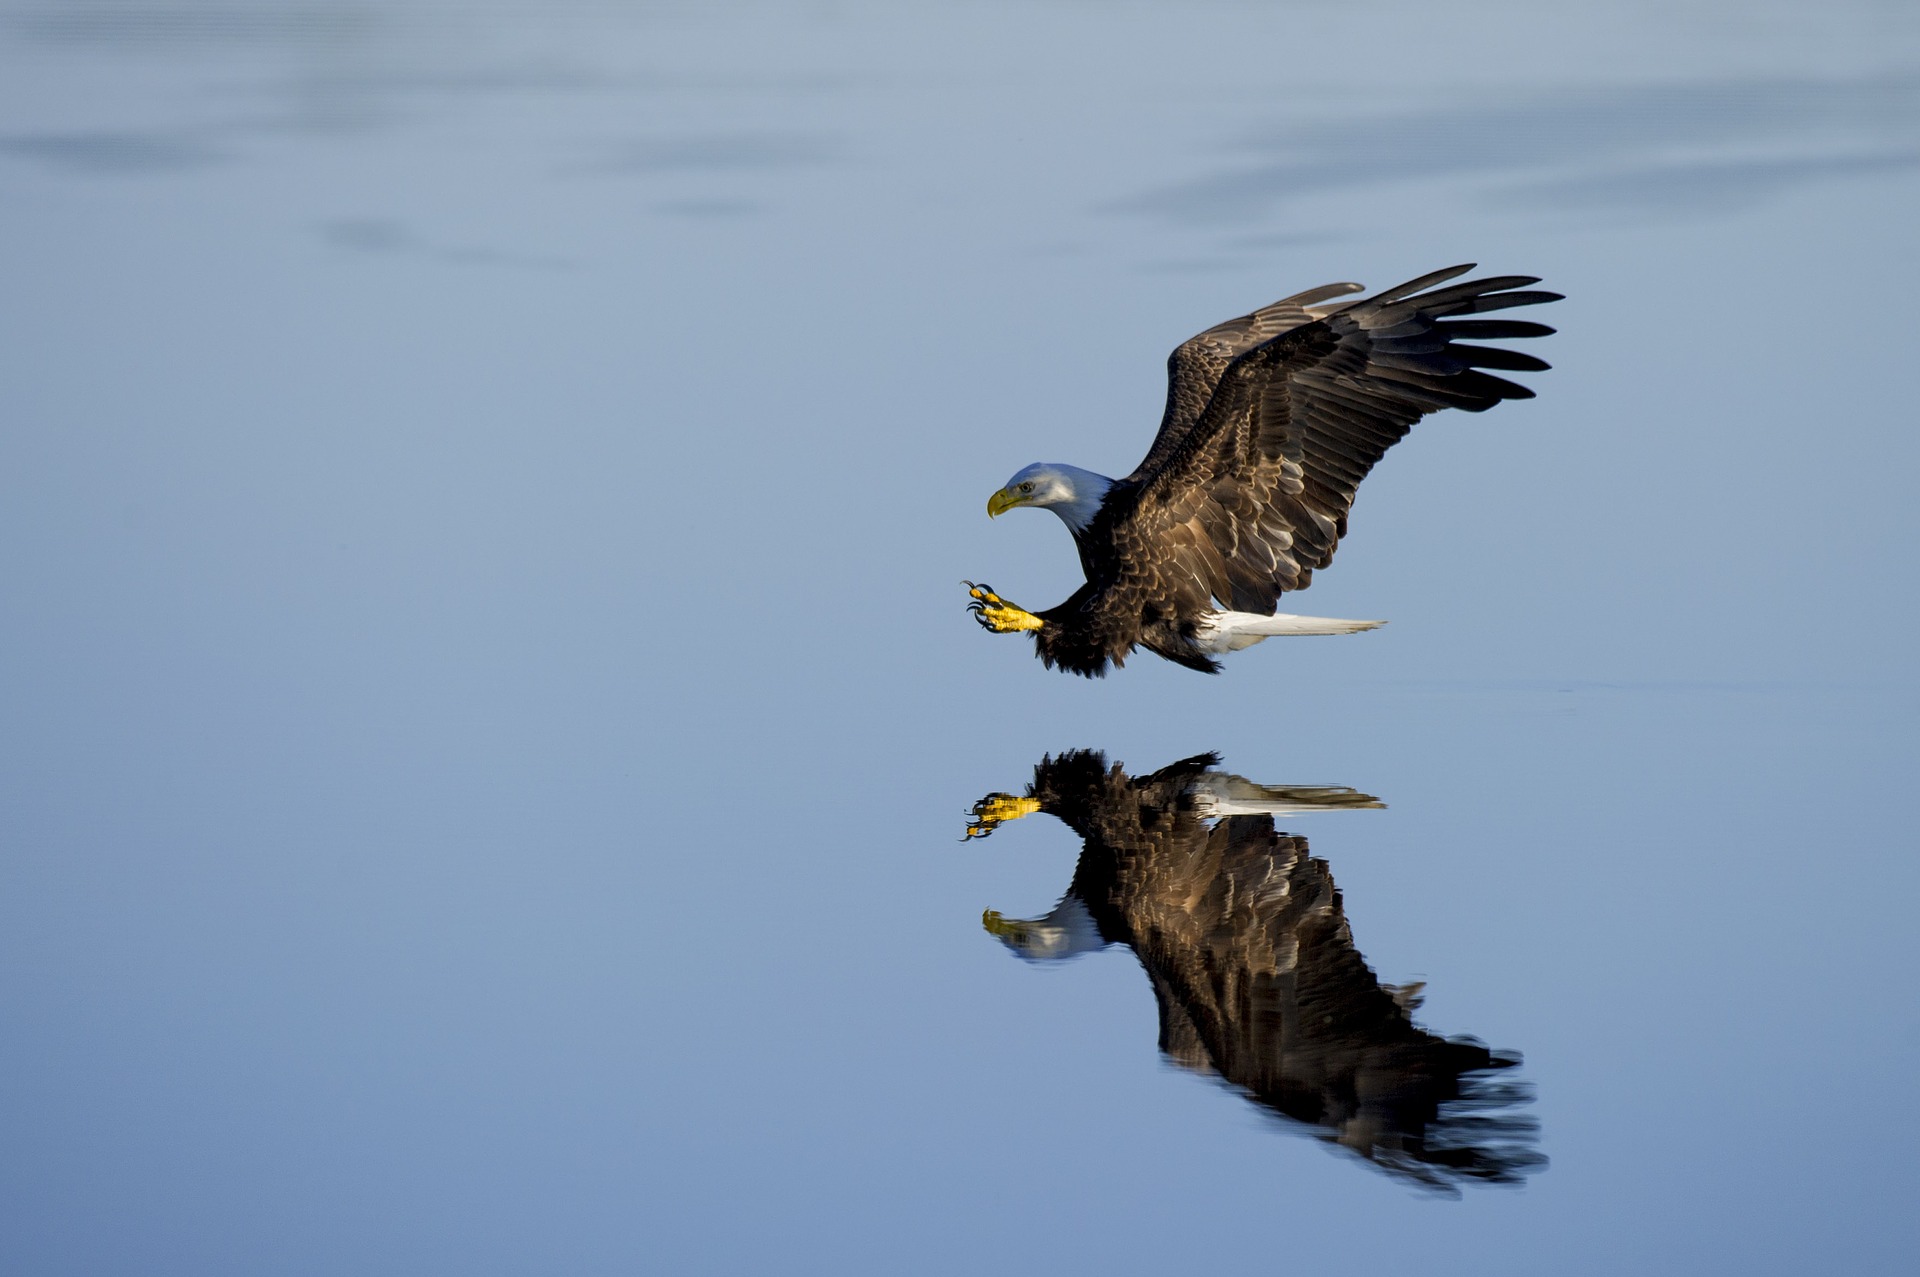 Bald eagle over water.